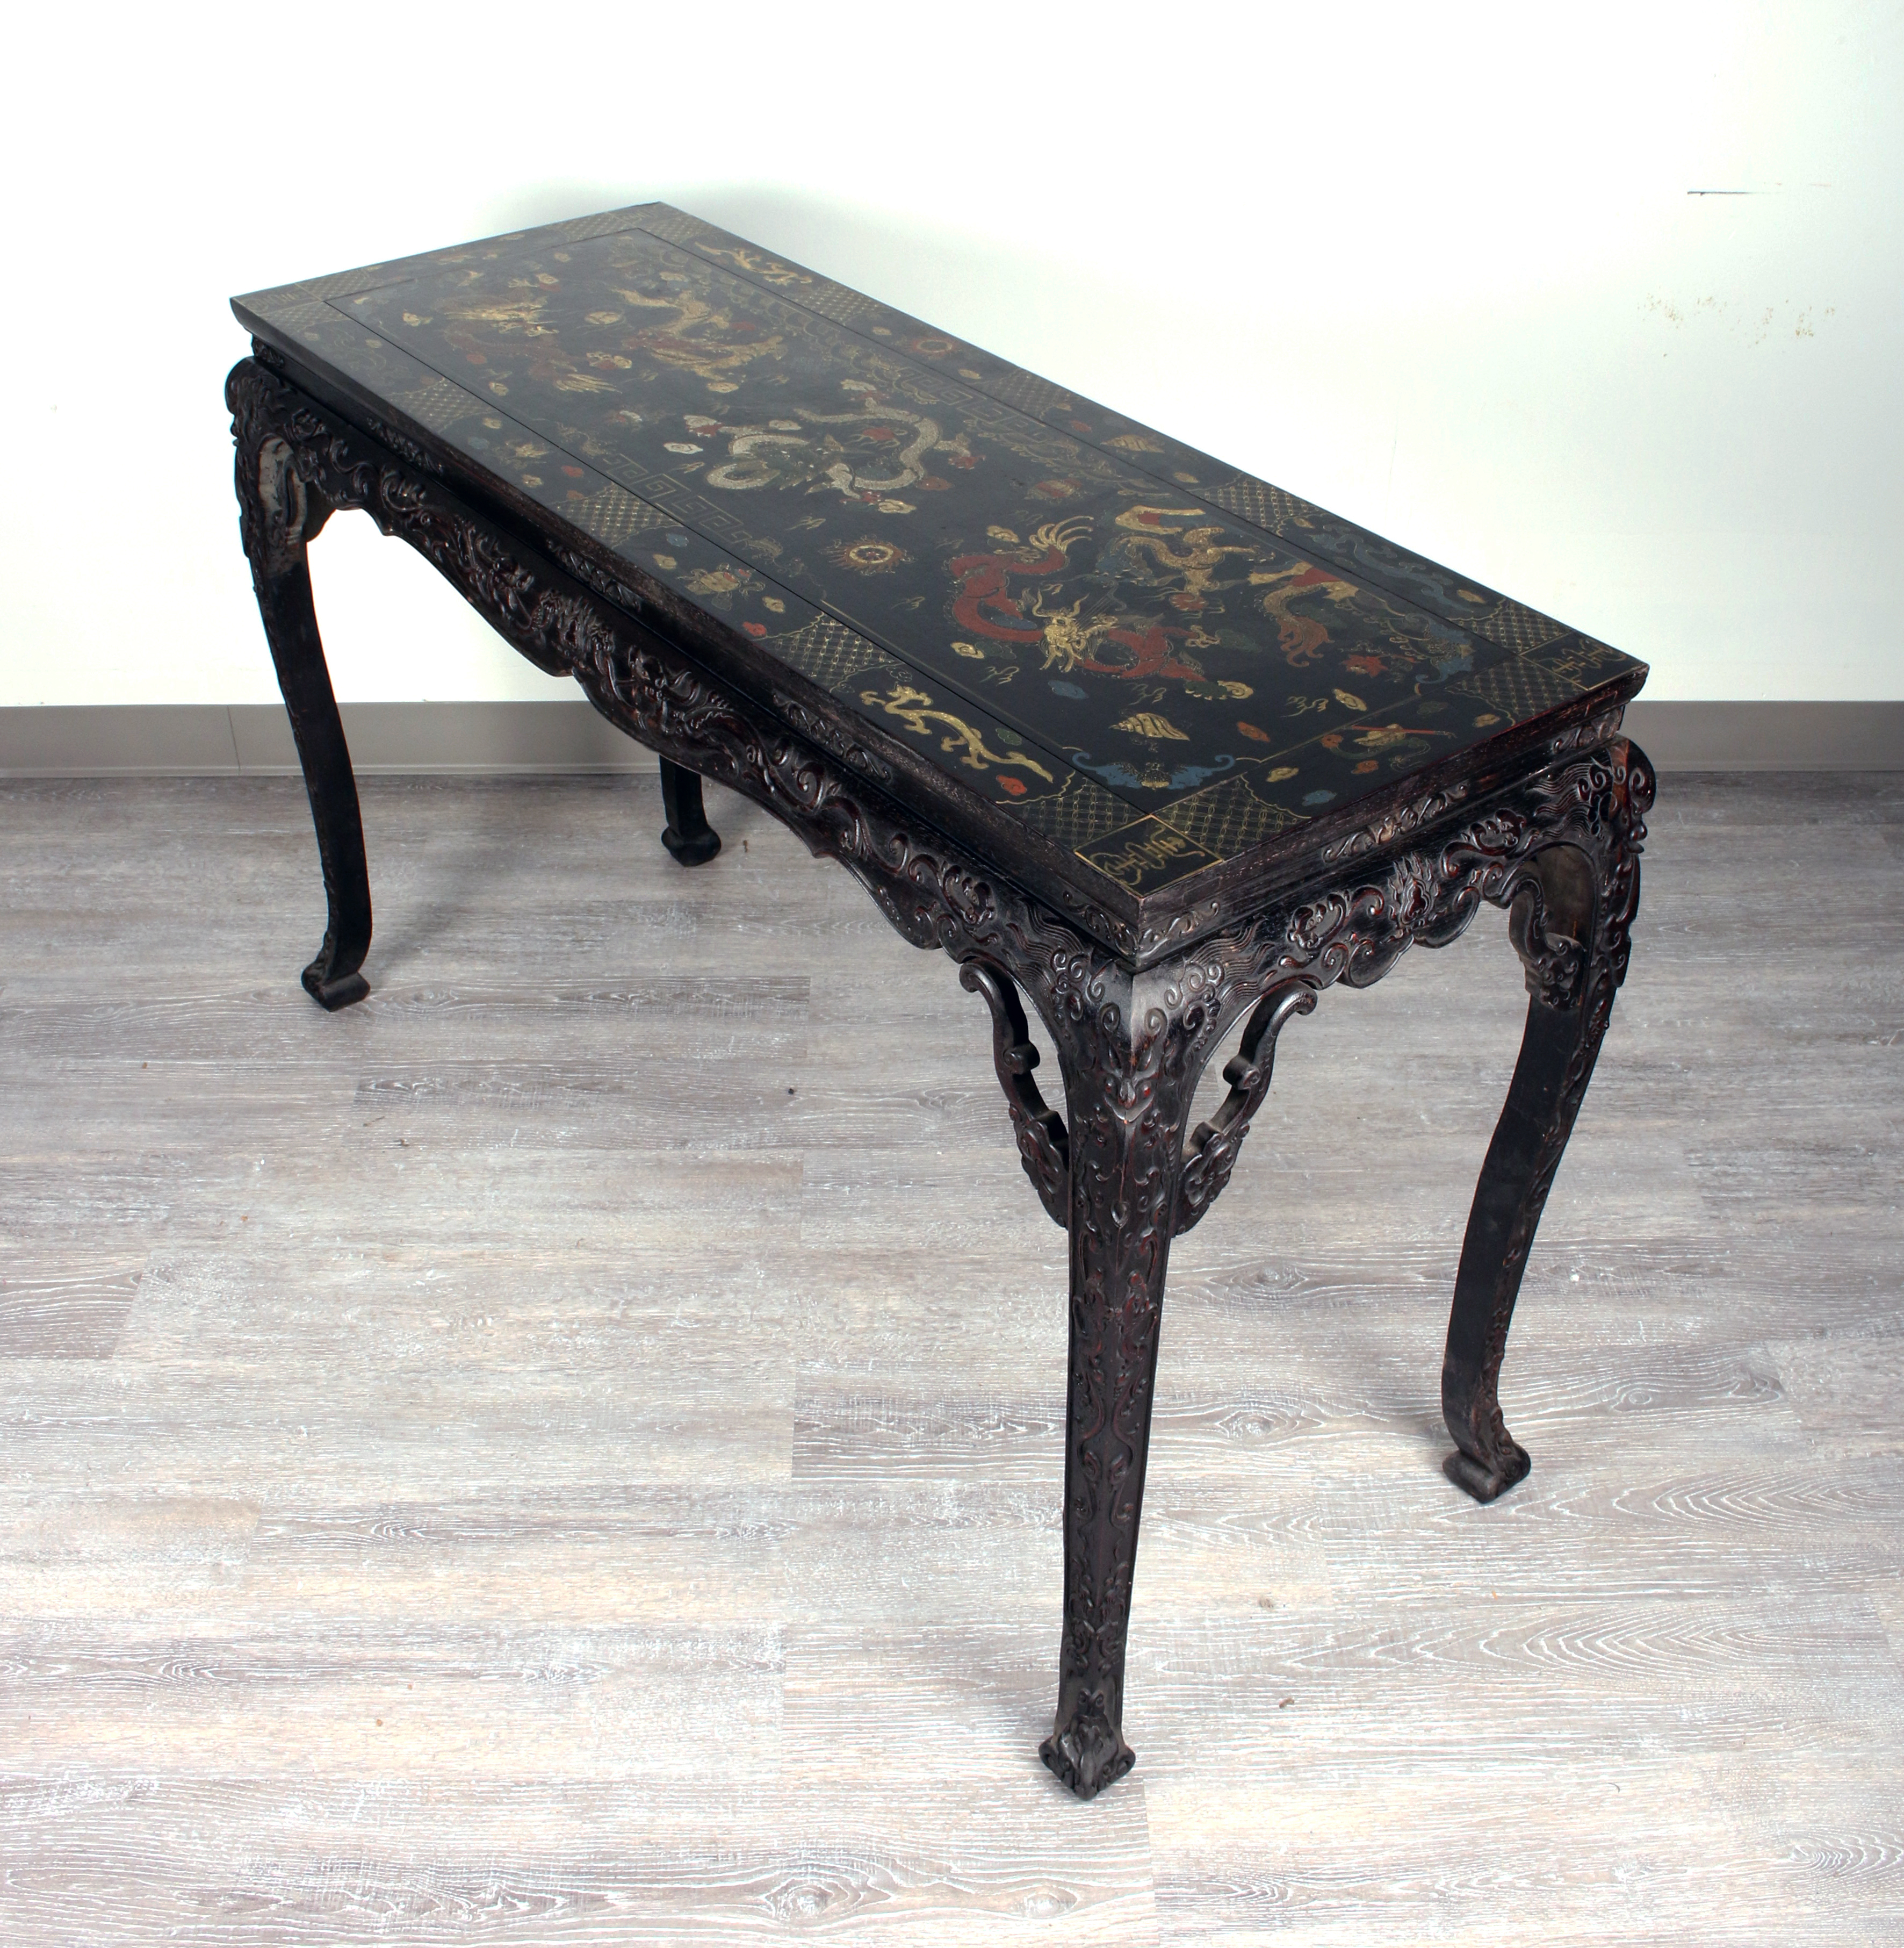 Vibrant Chinese Lacquer Table With Dragon Painting & Scholar Motifs image 6